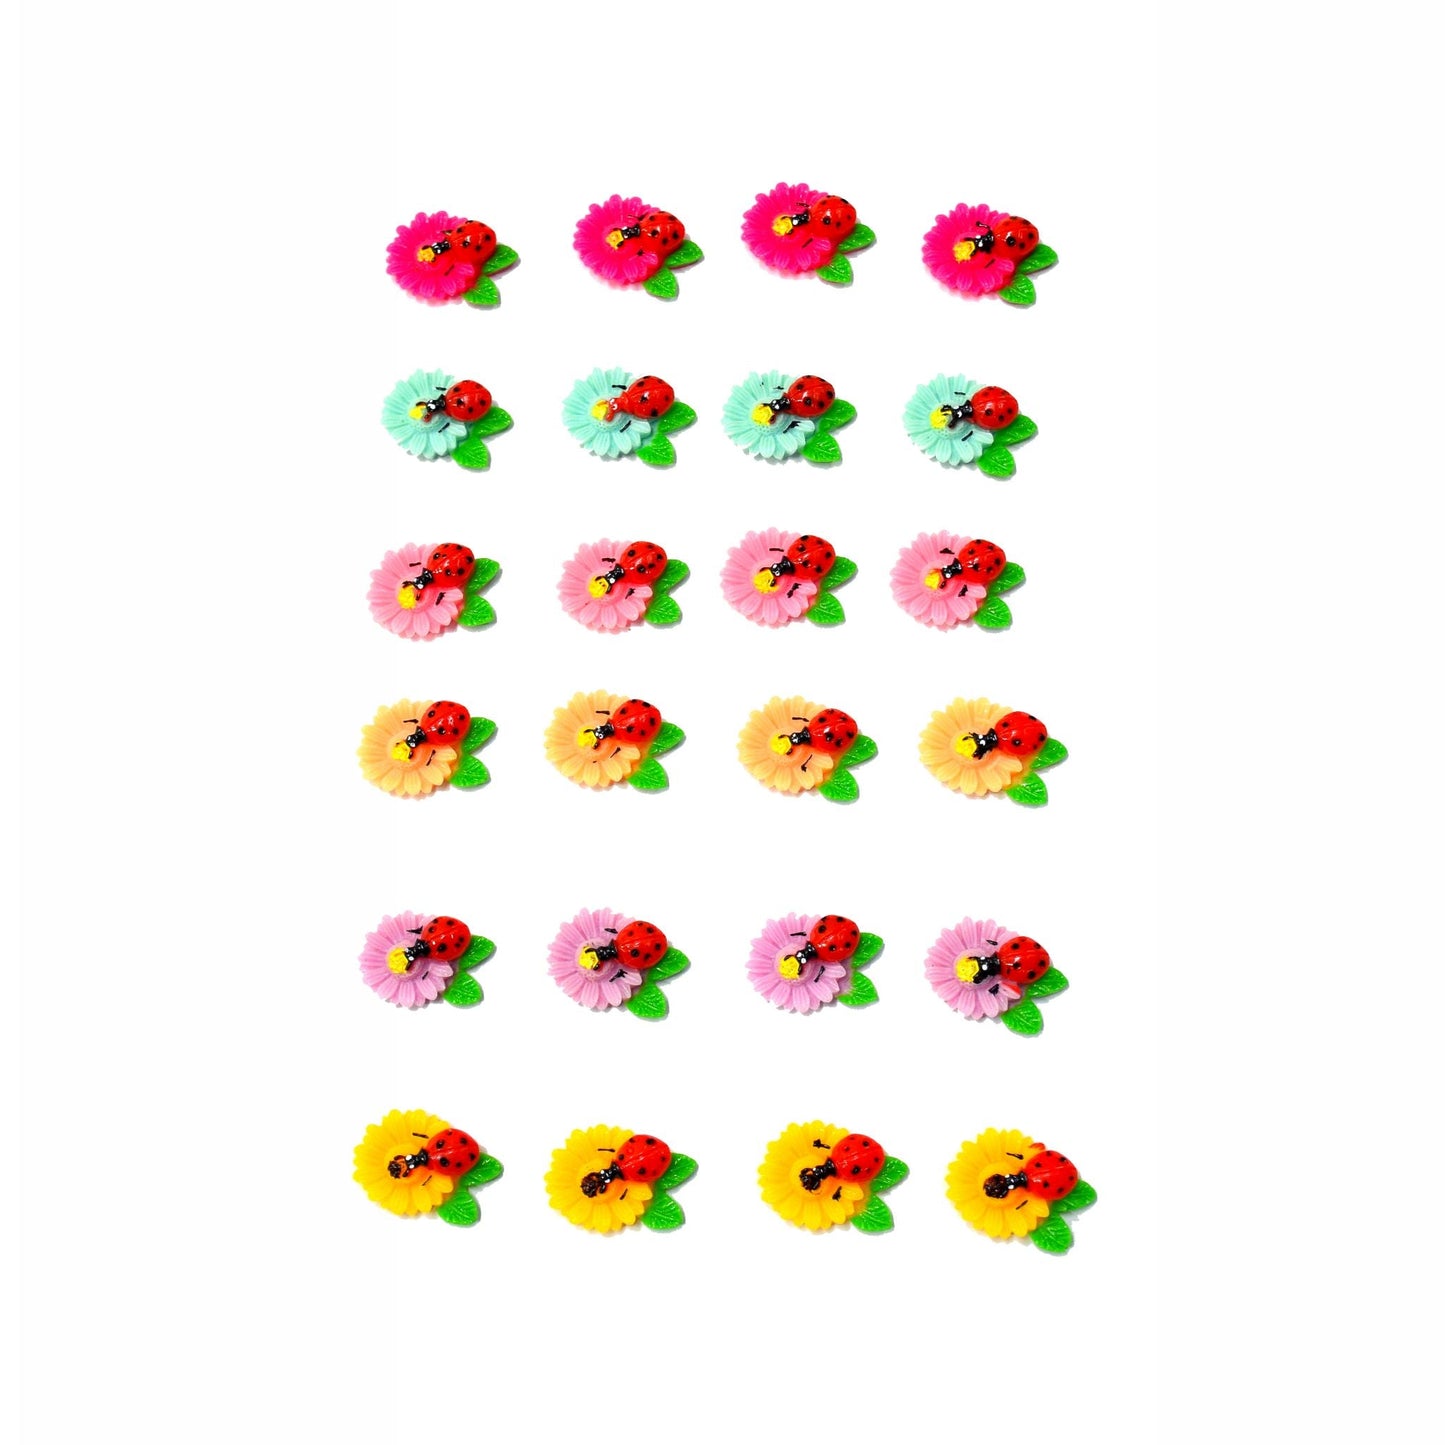 Indian Petals Flat-back Resin Flower with a Beetle Cabochons Motif for Craft Decoration or Rakhi - 12448